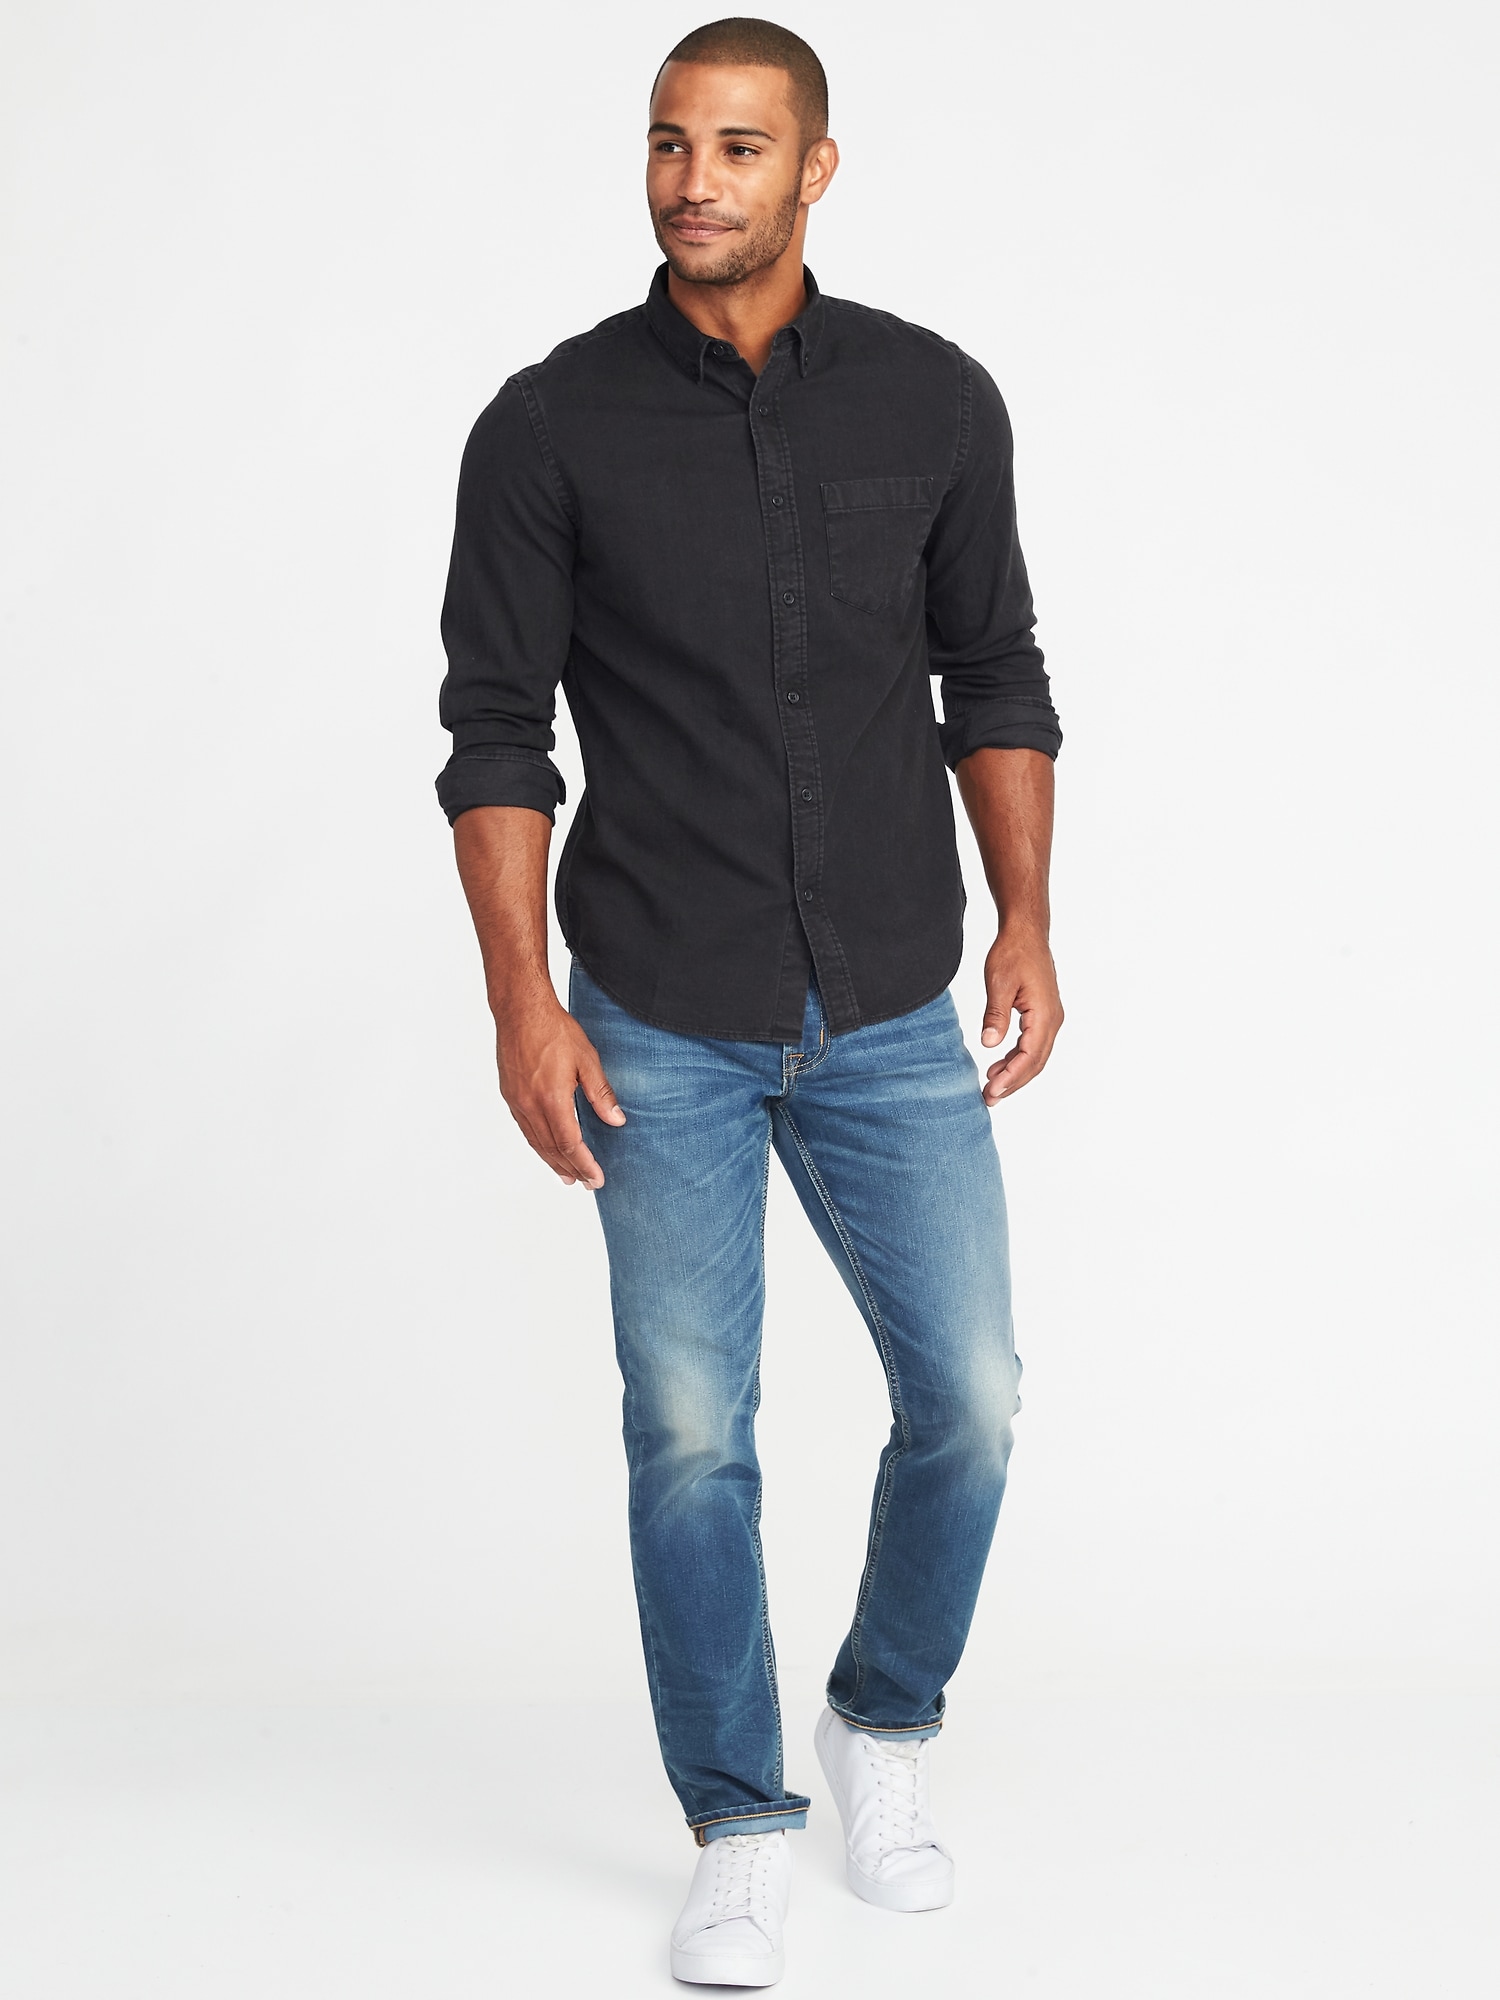 Buy Southbay Men Black Solid Slim Fit Casual Shirt Online at Low Prices in  India - Paytmmall.com